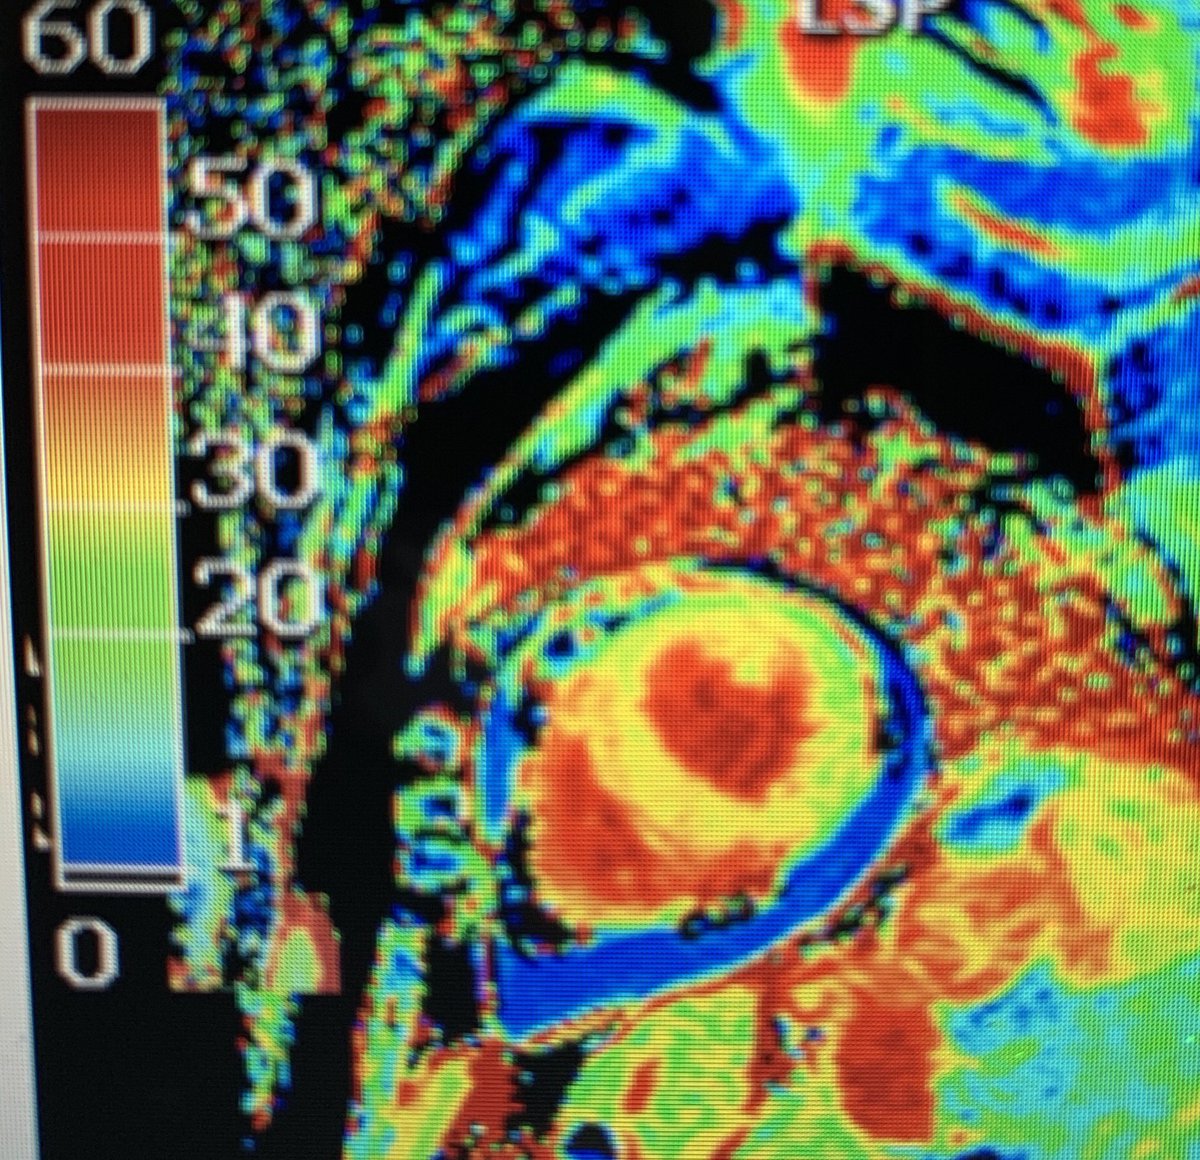  #whyCMR in TC:absence of LGE (at +5SD threshold) , but recent studies suggest LGE may be present T1 and ECV mapping detect diffuse ECM abnormalities- here ECV normal at basal LV, increased at apical LVstrain can help detect myocardial deformation abnormalities